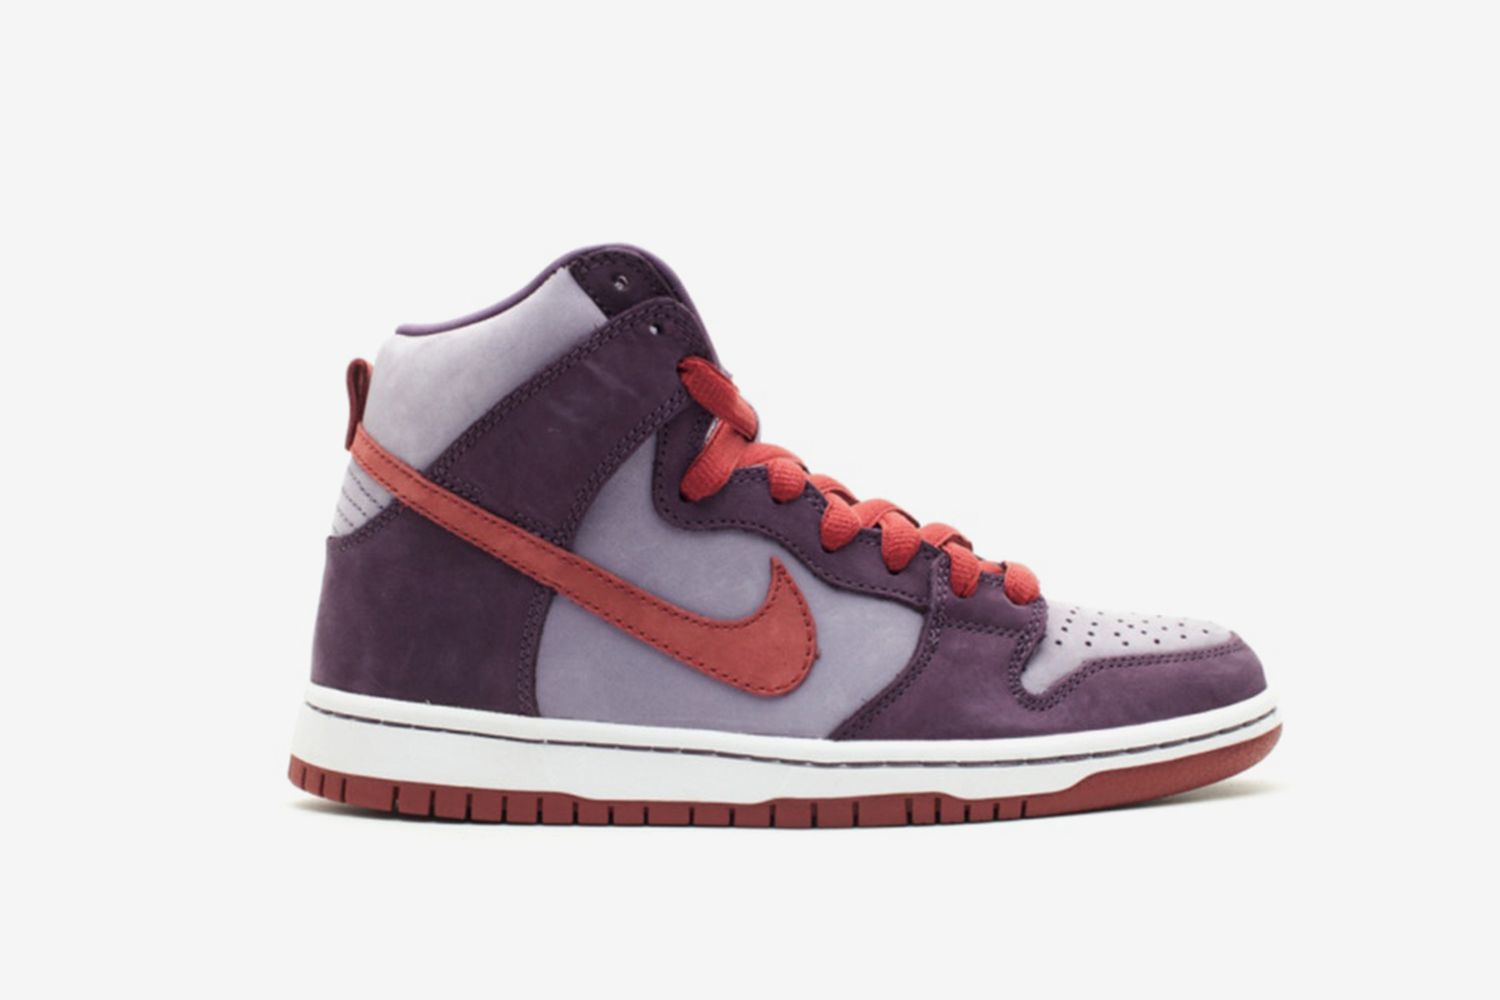 Shop Two New Nike Dunk Sneakers at StockX Now